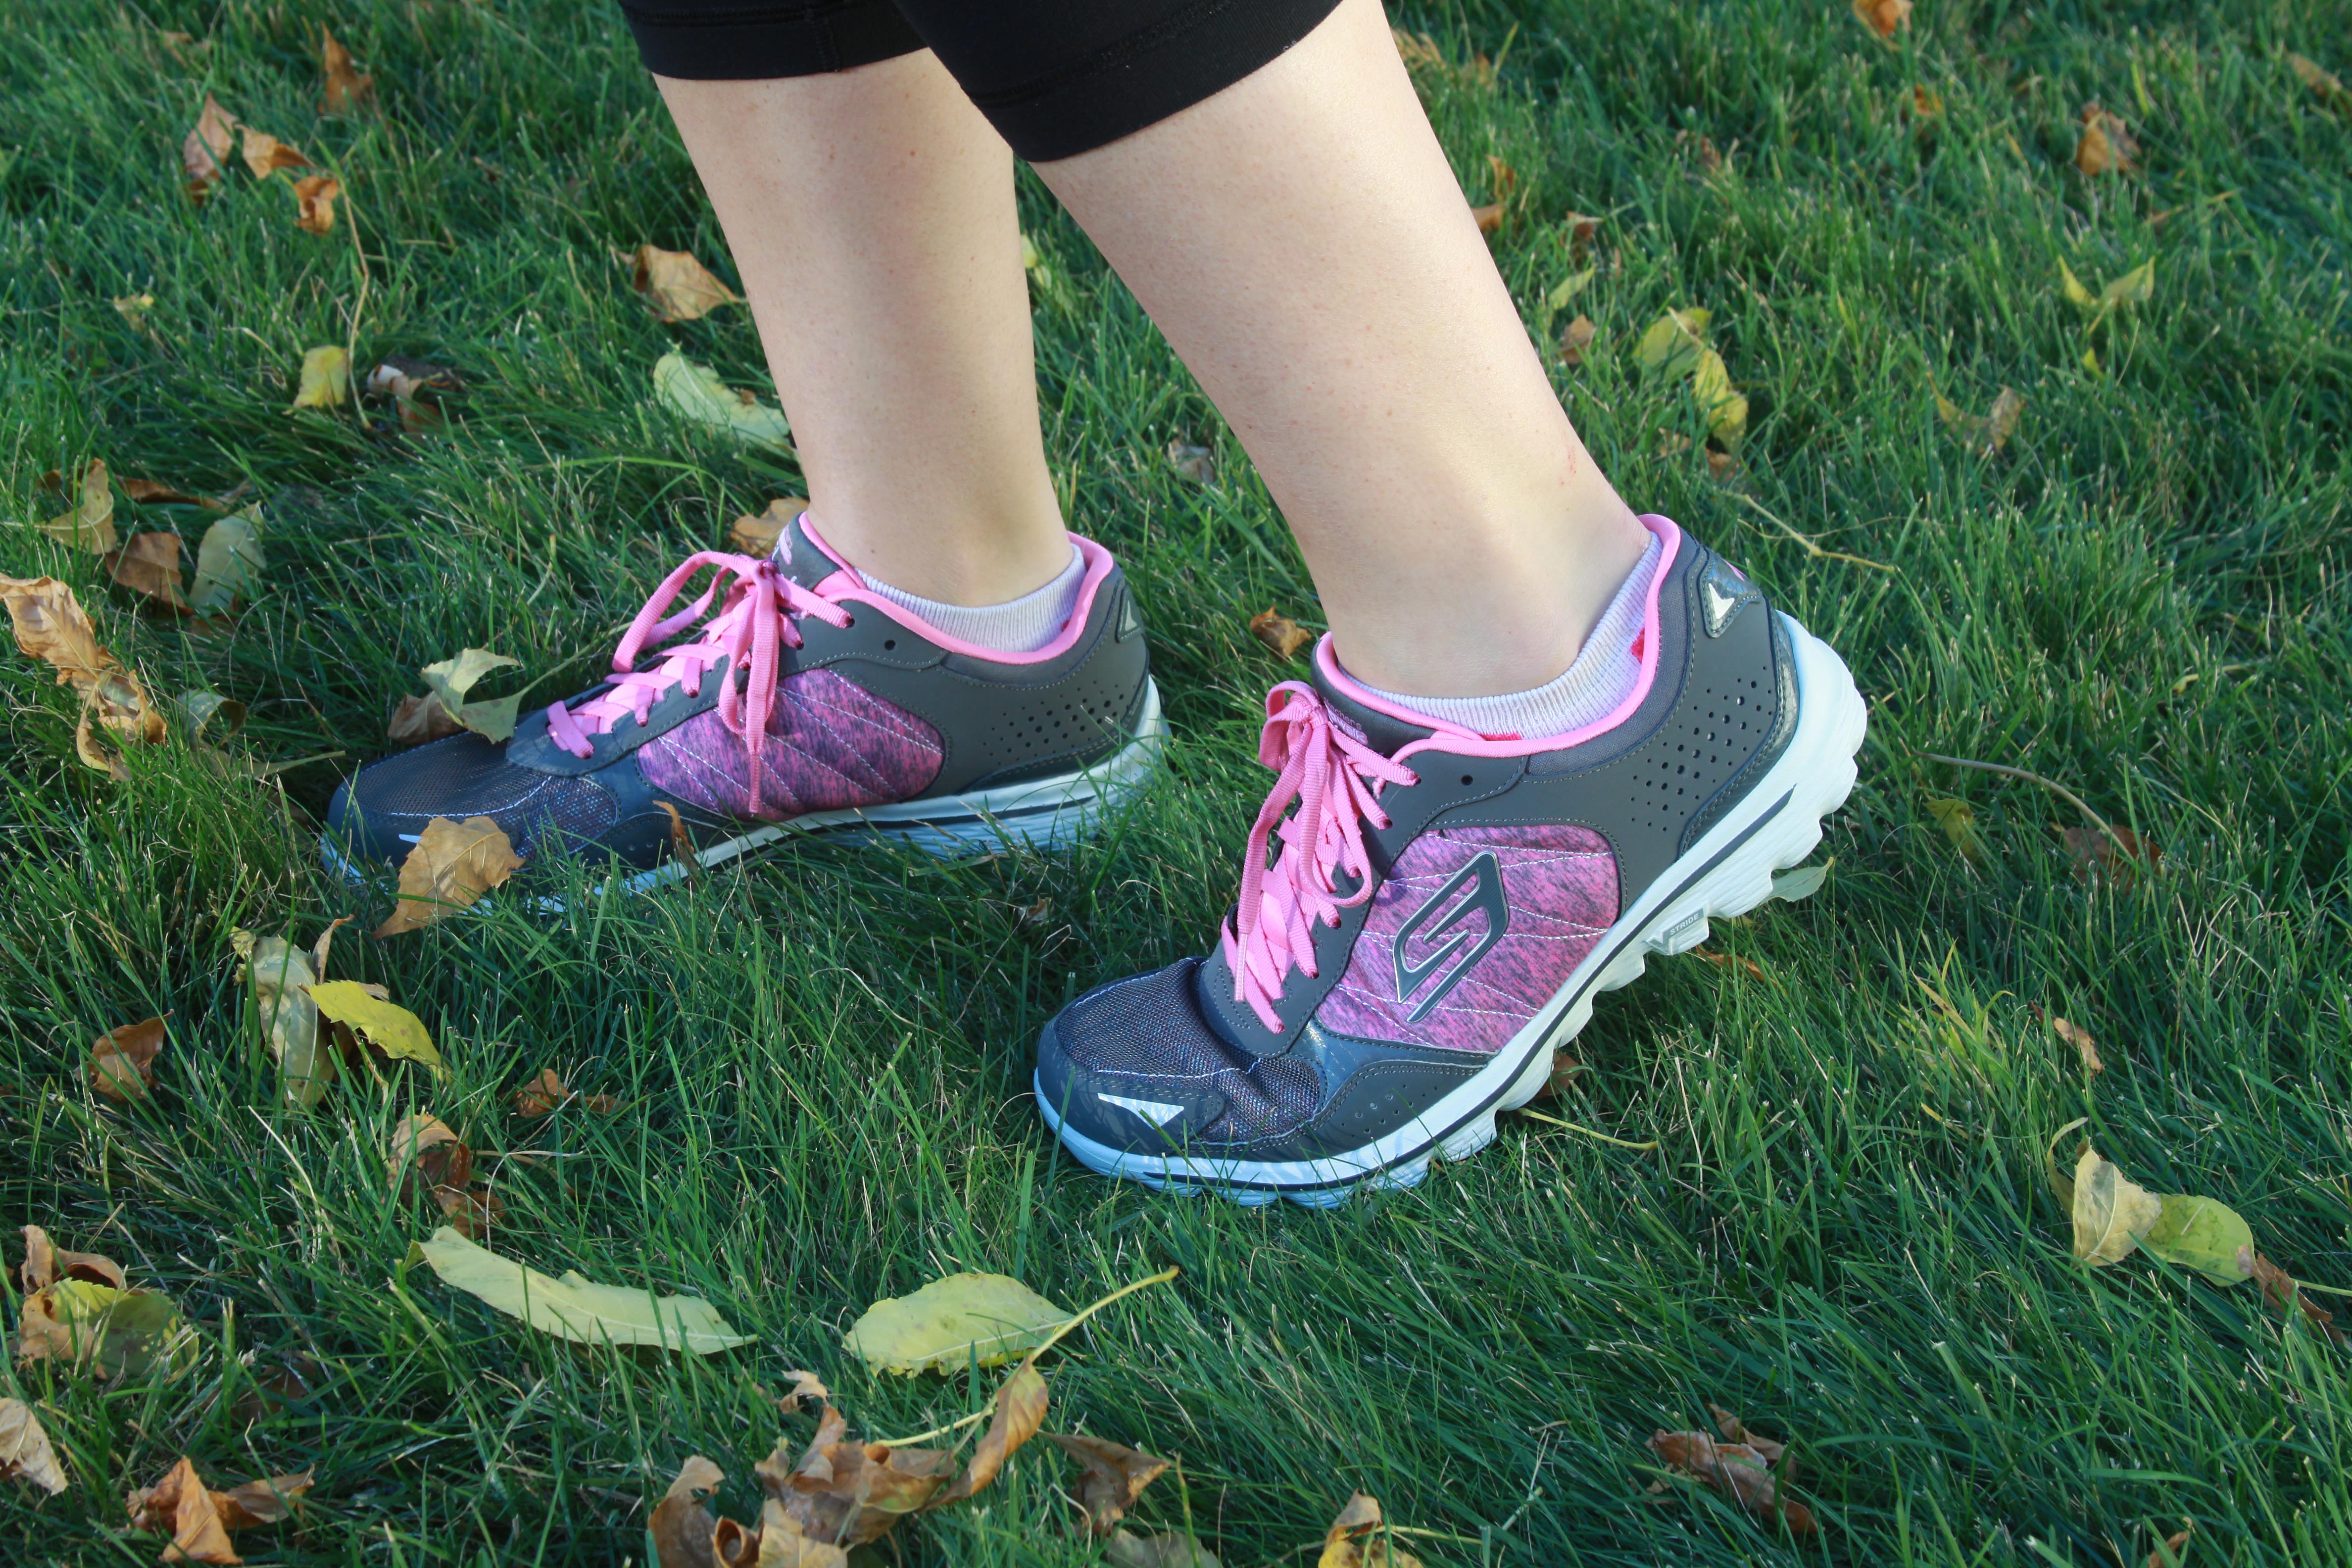 skechers breast cancer shoes